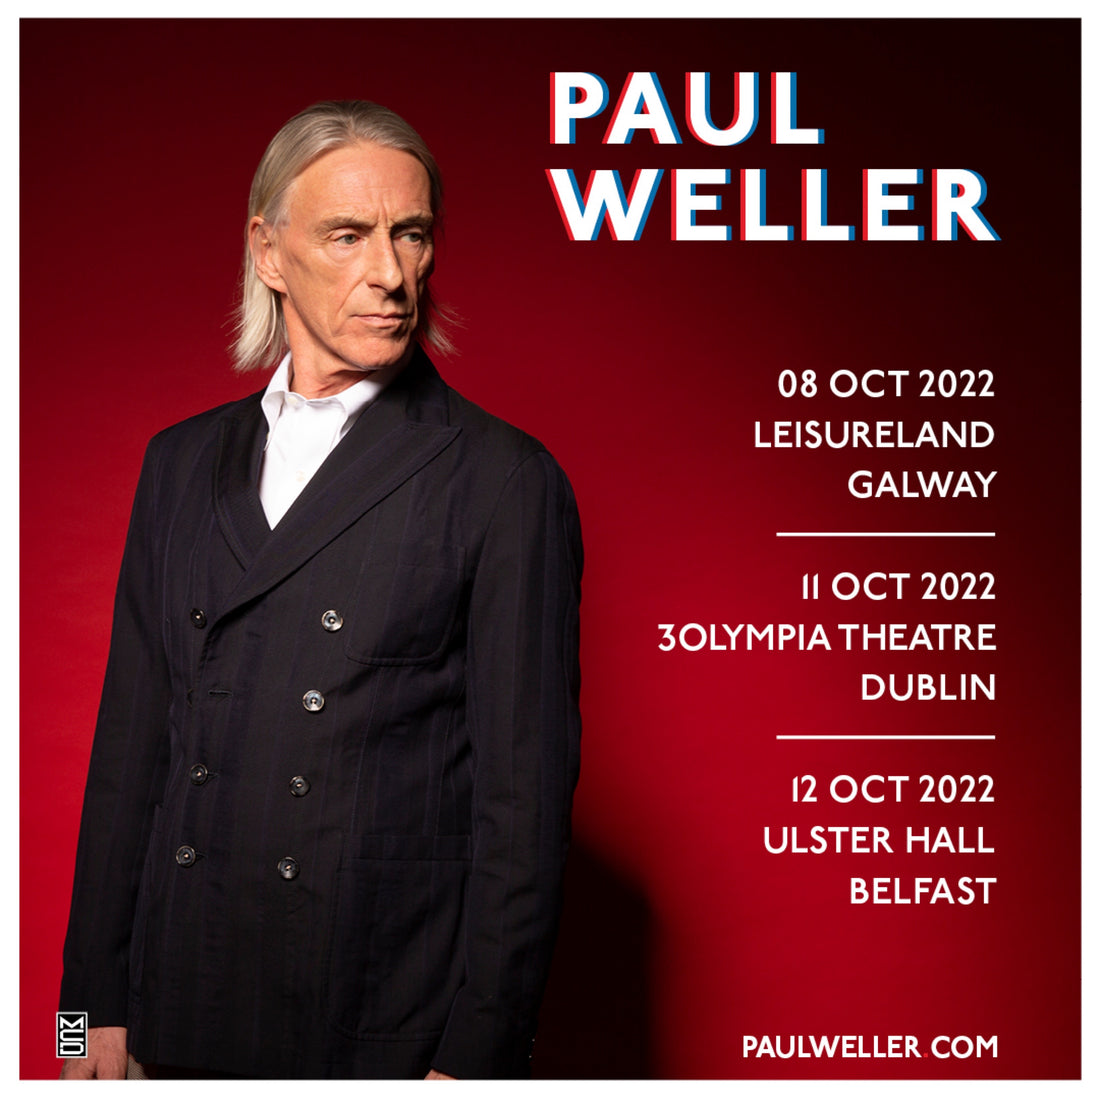 Paul Weller has announced live show in the iconic Ulster Hall in Belfast